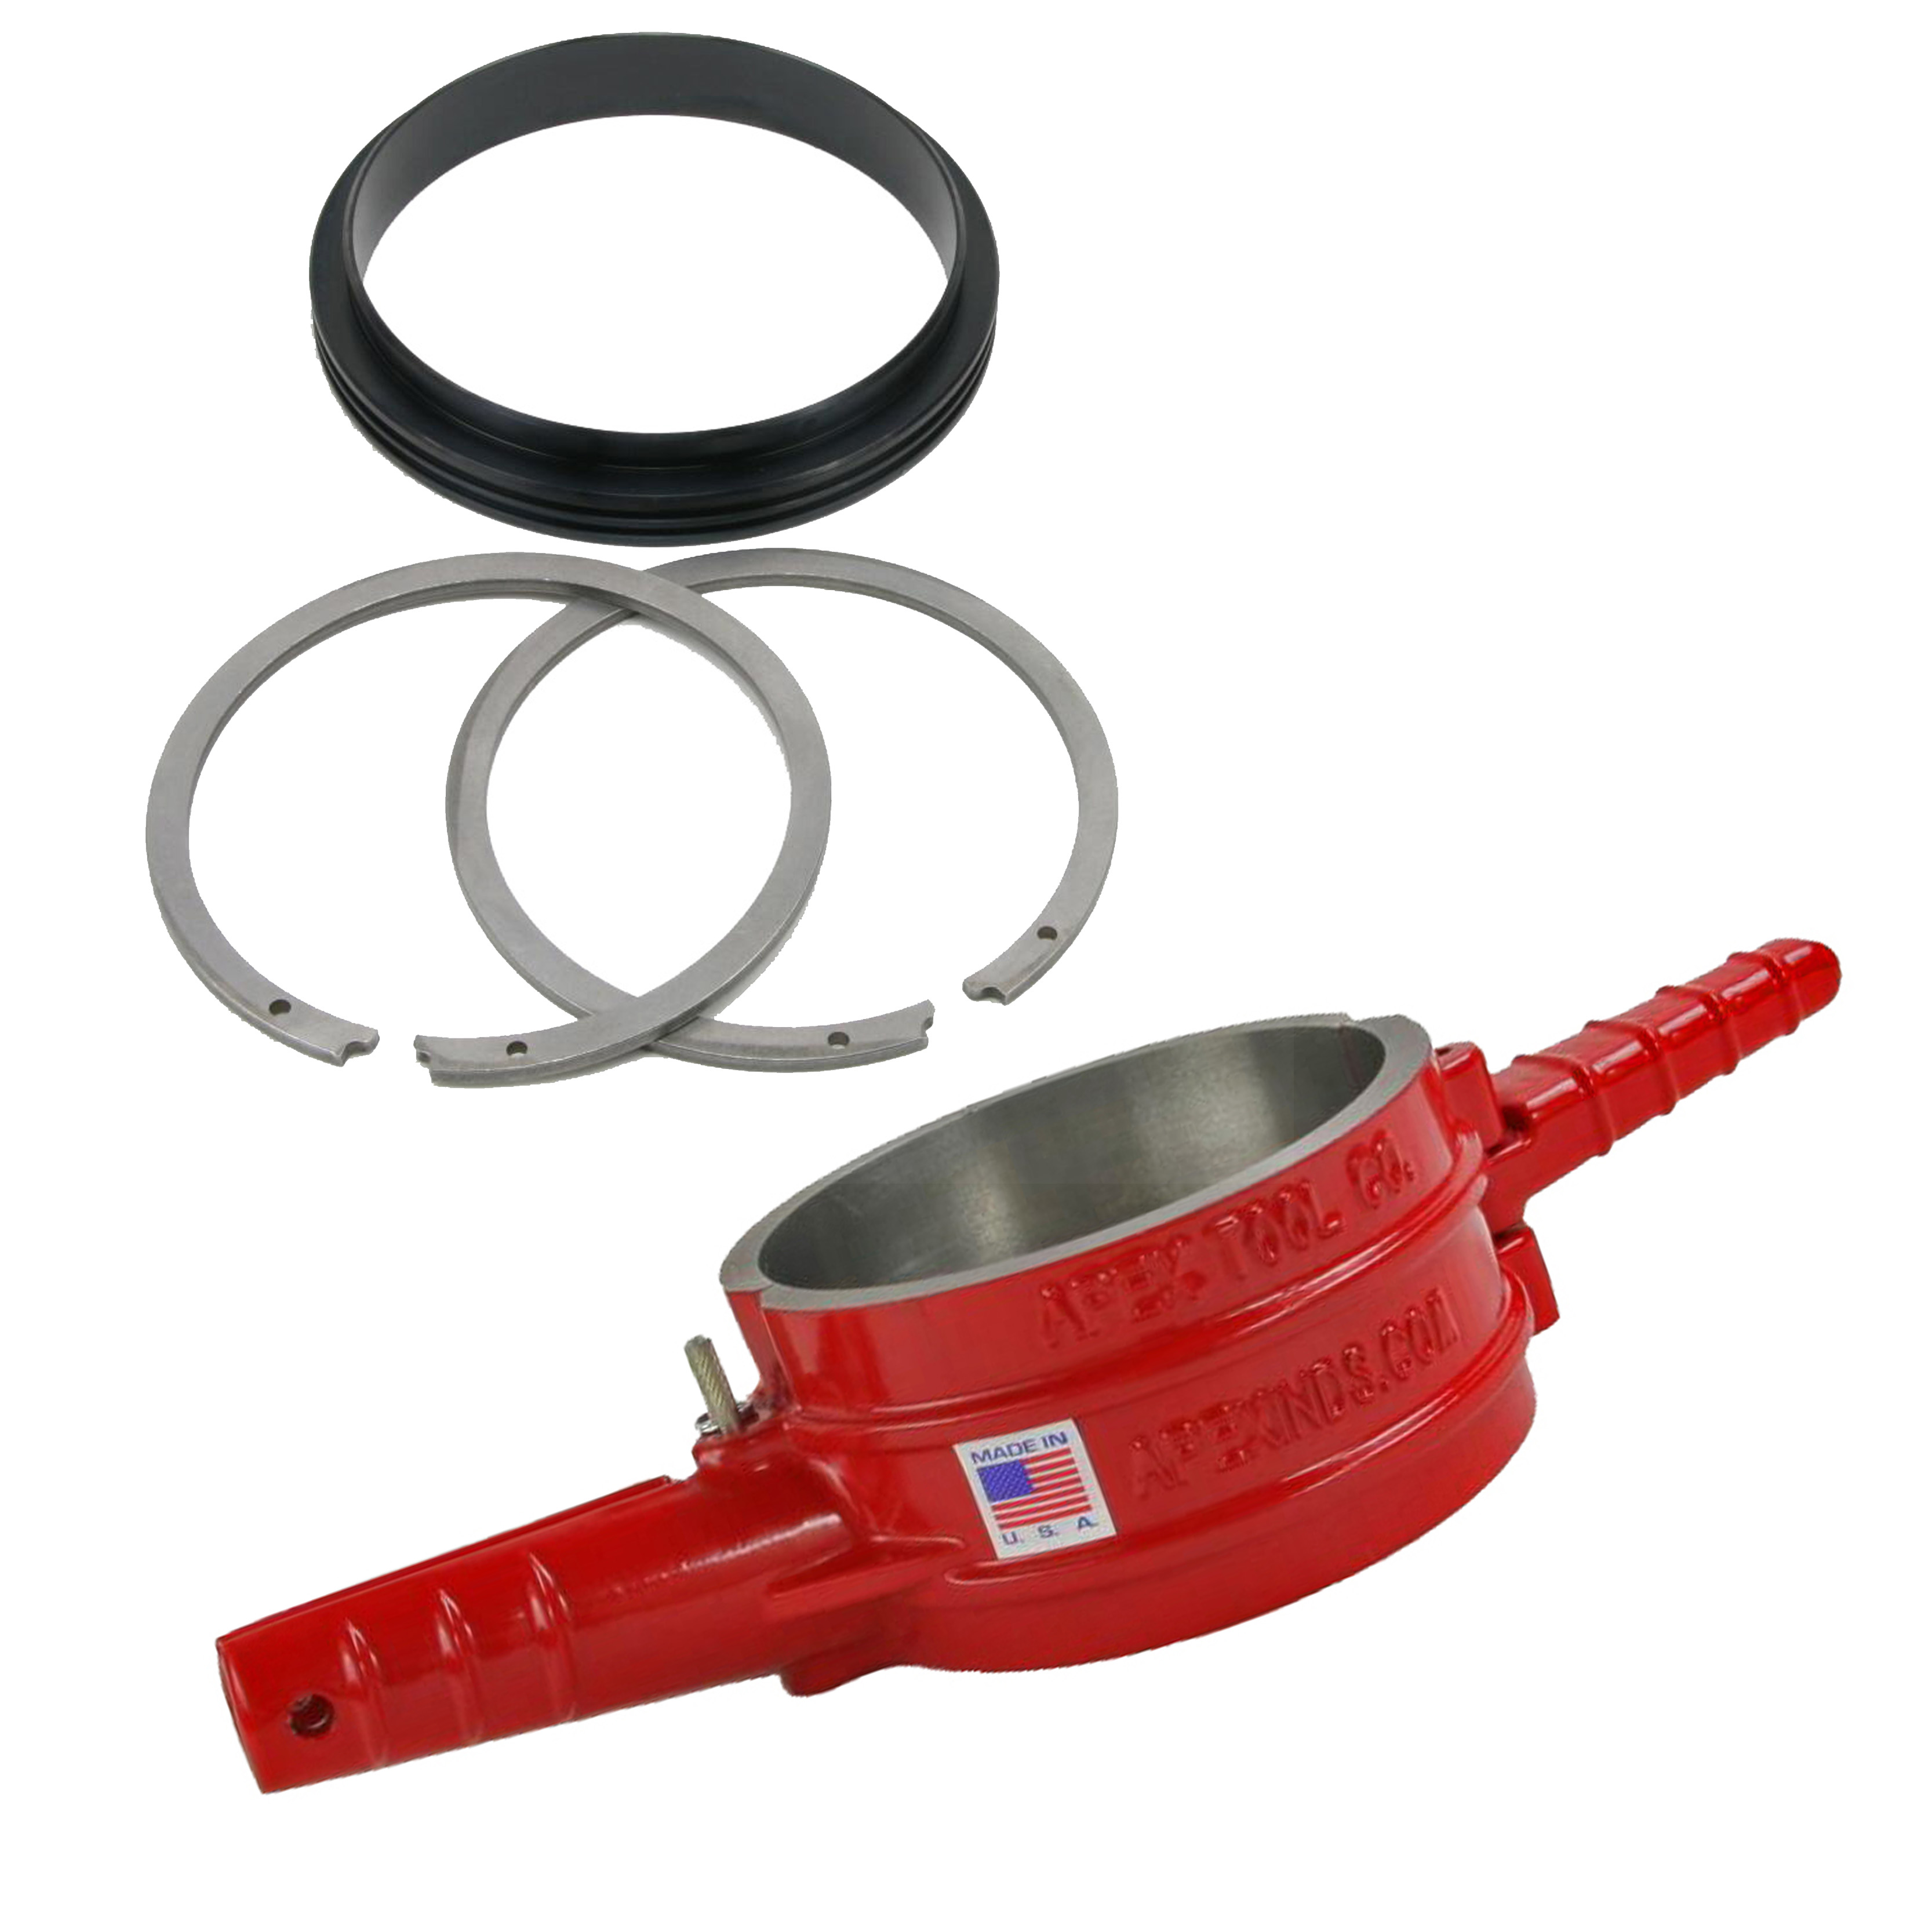 PUNLIM Piston Ring Compressor Adapter & Anti-Polishing Ring 5.4 Bore For Cummins ISX 5299447 and 5299339 5299448 